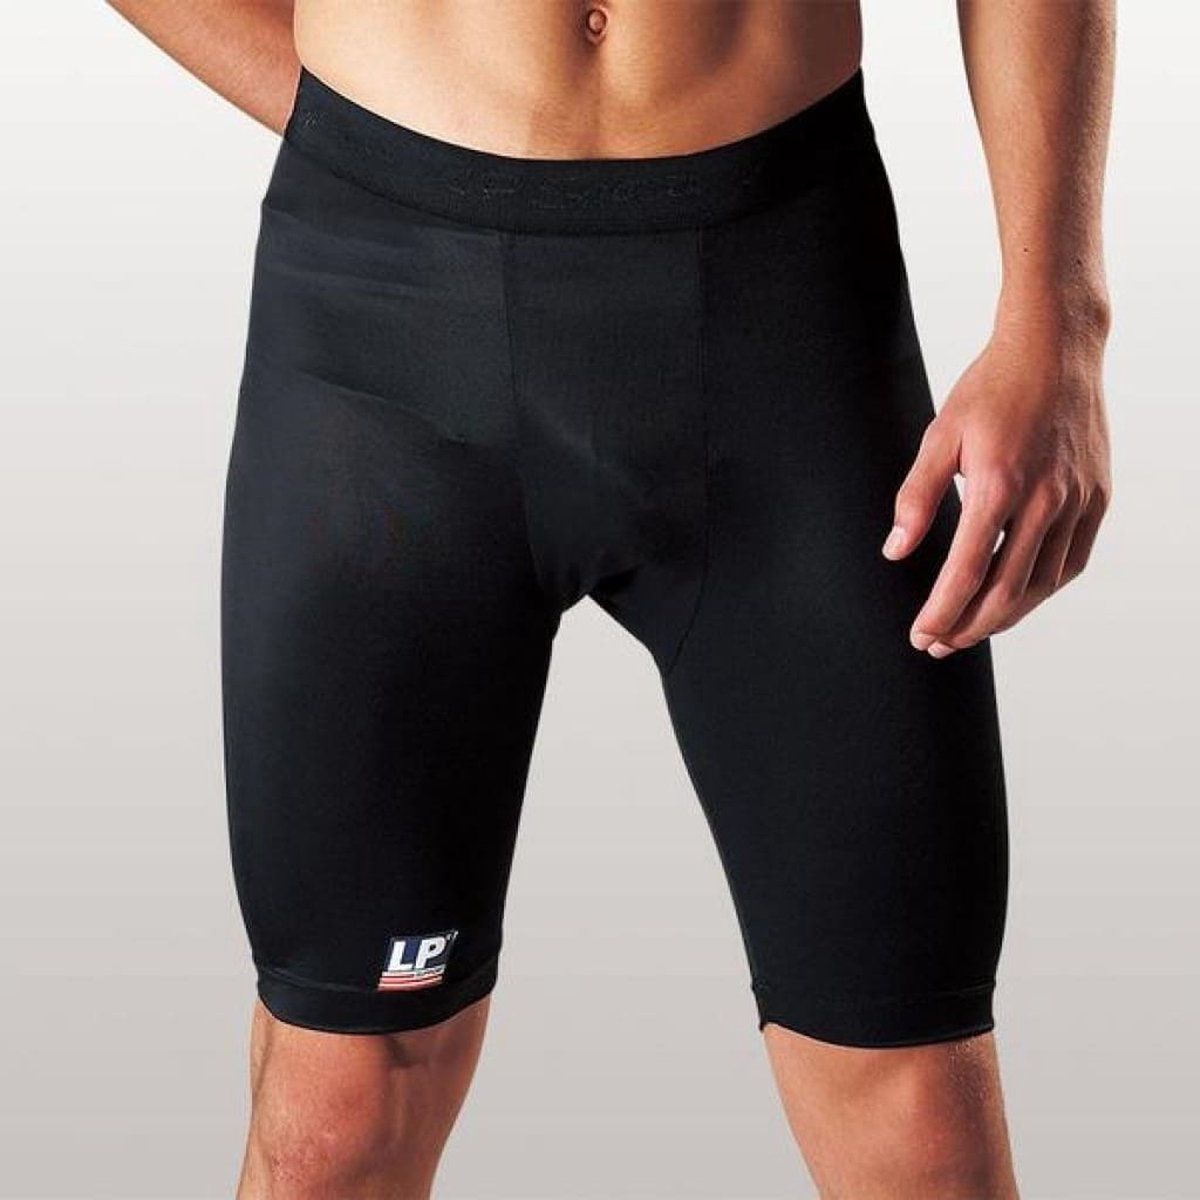 LP Support Compression / Thermal Shorts front view